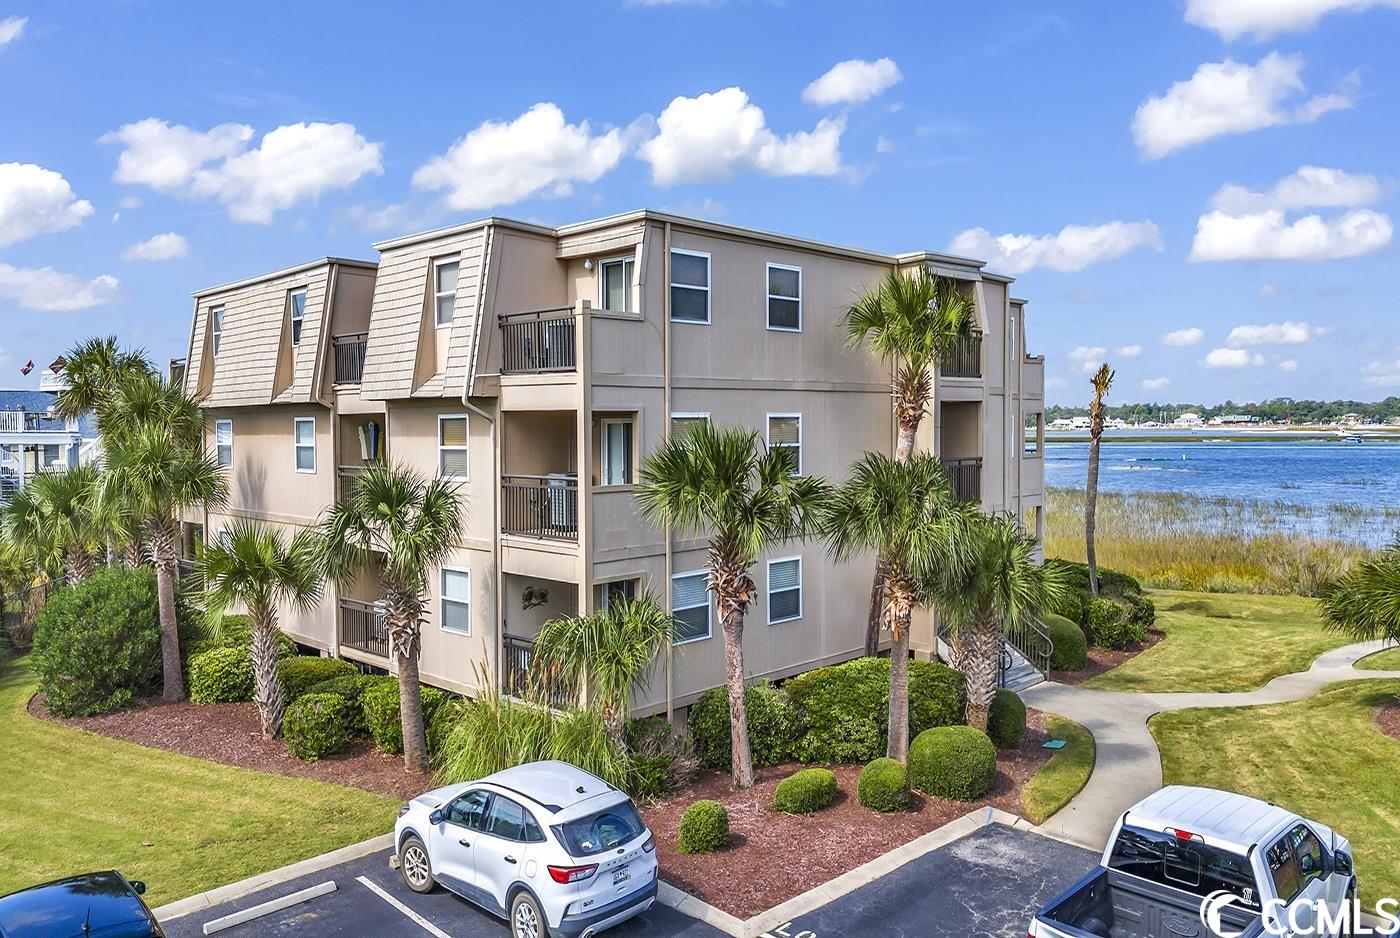 discover your coastal sanctuary at inlet pointe in garden city beach. this two-bedroom one bath furnished condo is located on the third floor in the building that is on the marsh. it has amazing views of the marsh and you can see the ocean from the balcony. inlet pointe is a gated community with many amenities including a marsh front swimming pool, long new dock, boat storage, and private access to the beach across the street.   inlet pointe is situated on 3.5 acres of land so there is plenty of outdoor space and a beautiful area to grill and watch the spectacular sunsets. speaking of boats, this condo is being sold with a 17-foot wahoo boat and trailer. boat is being sold ‘as is”. inlet pointe is just a short walk to two restaurants and a marina. short term rentals are allowed.